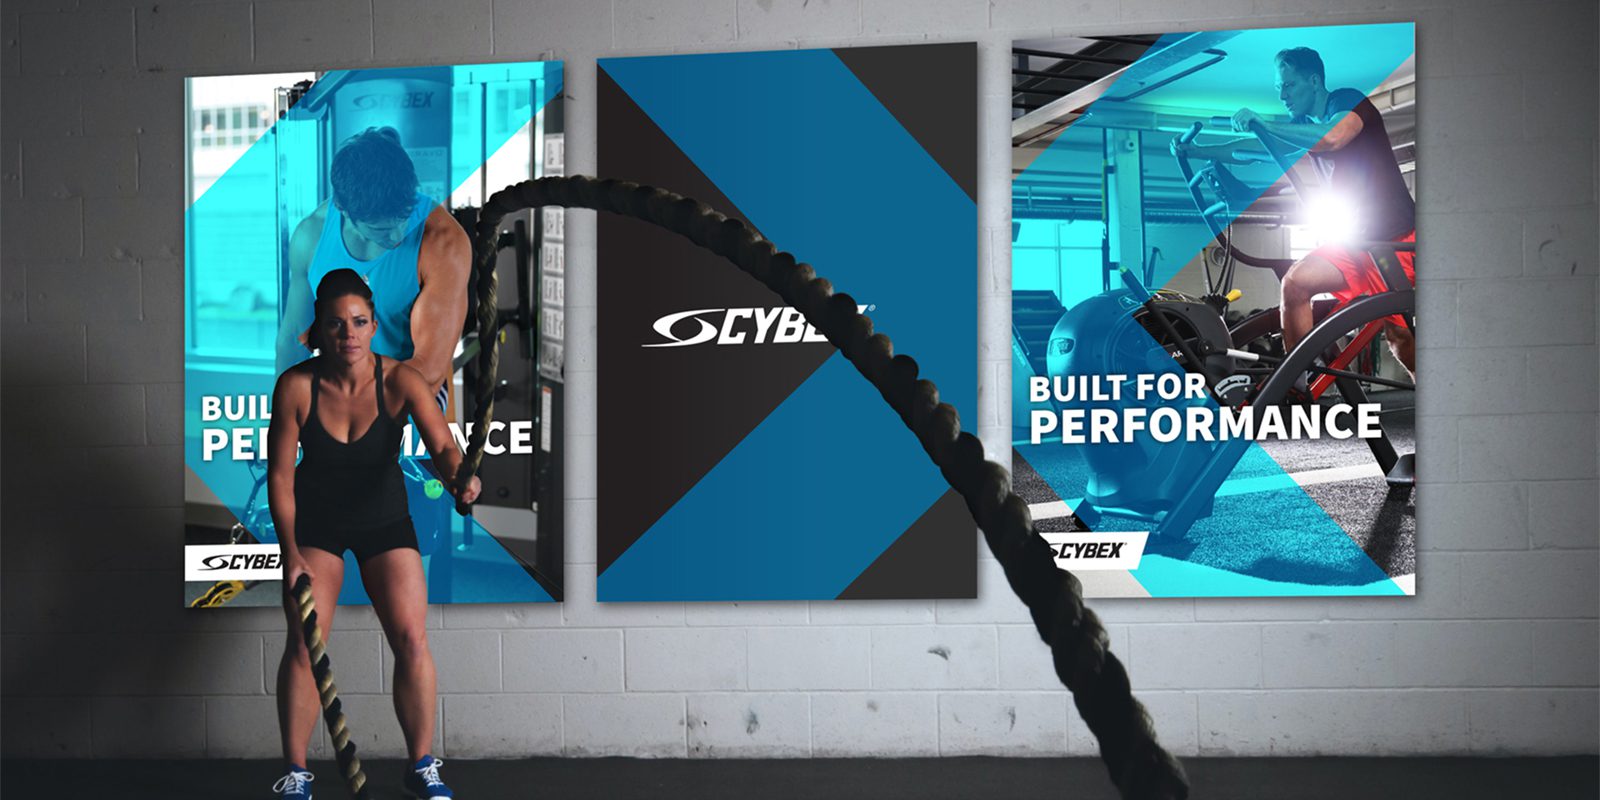 Cybex Marketing Campaing By ipulse Poster Design